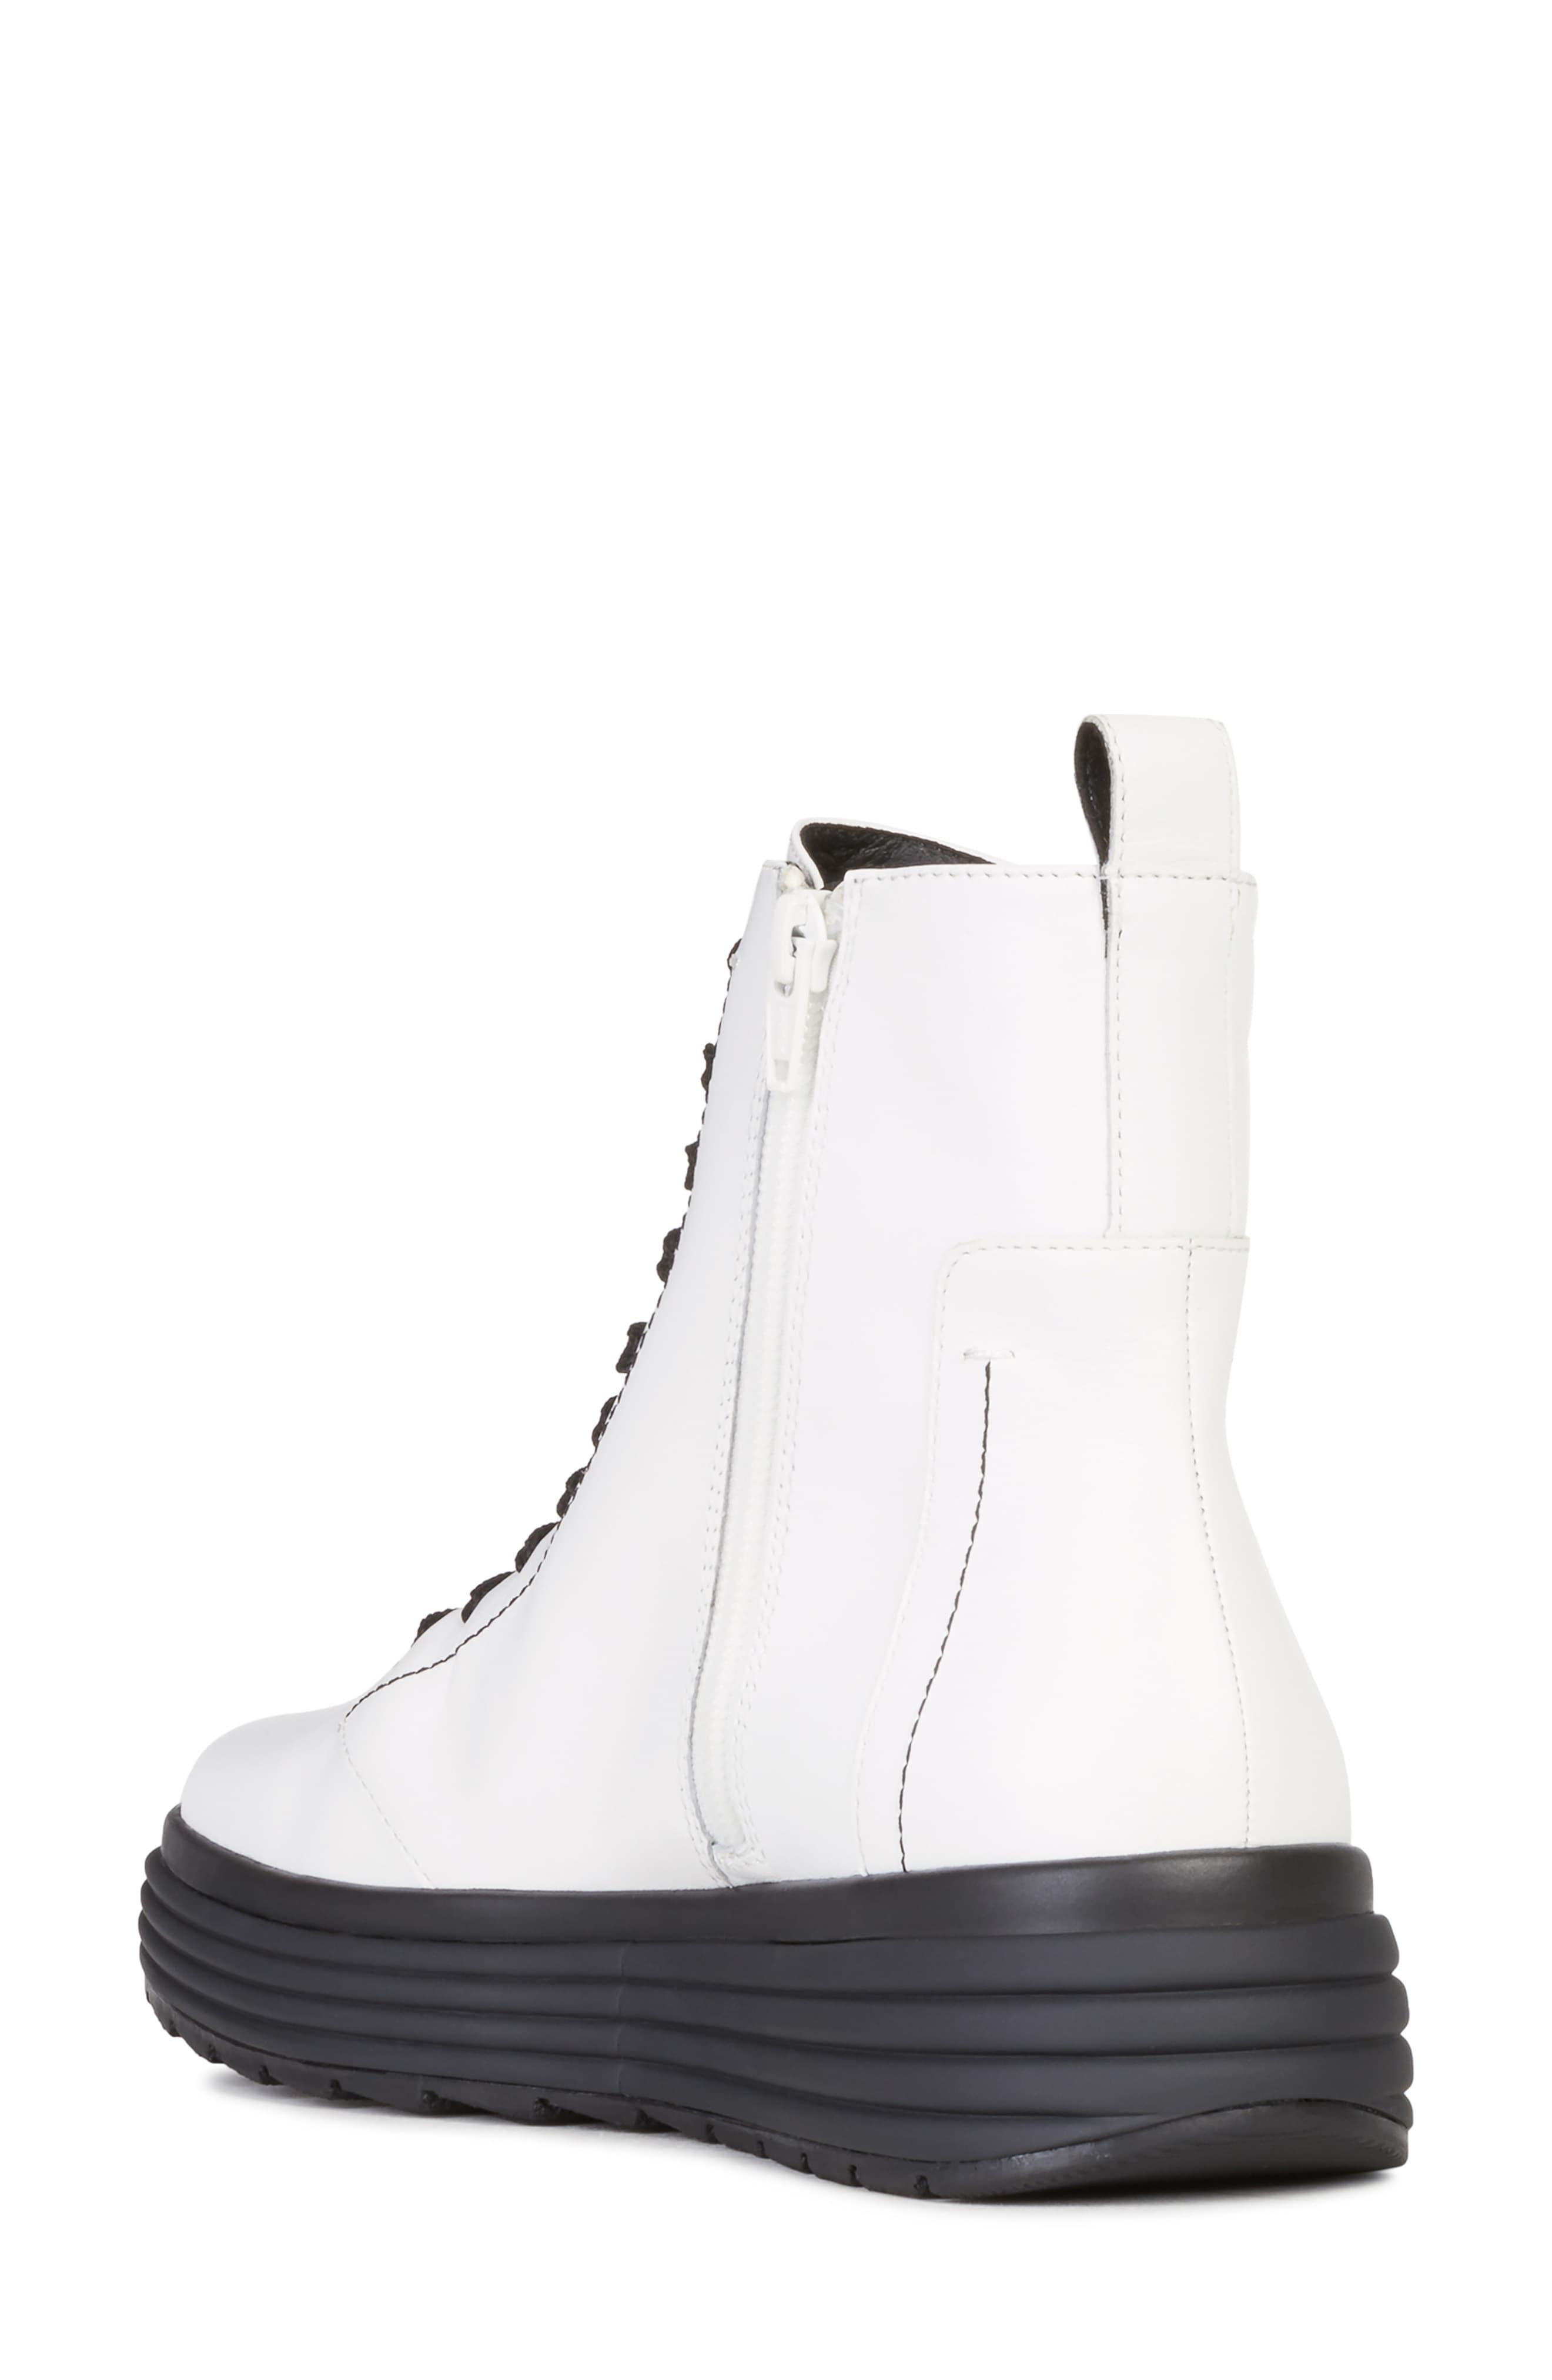 geox ashley boots, amazing clearance Save 74% available - statehouse.gov.sl